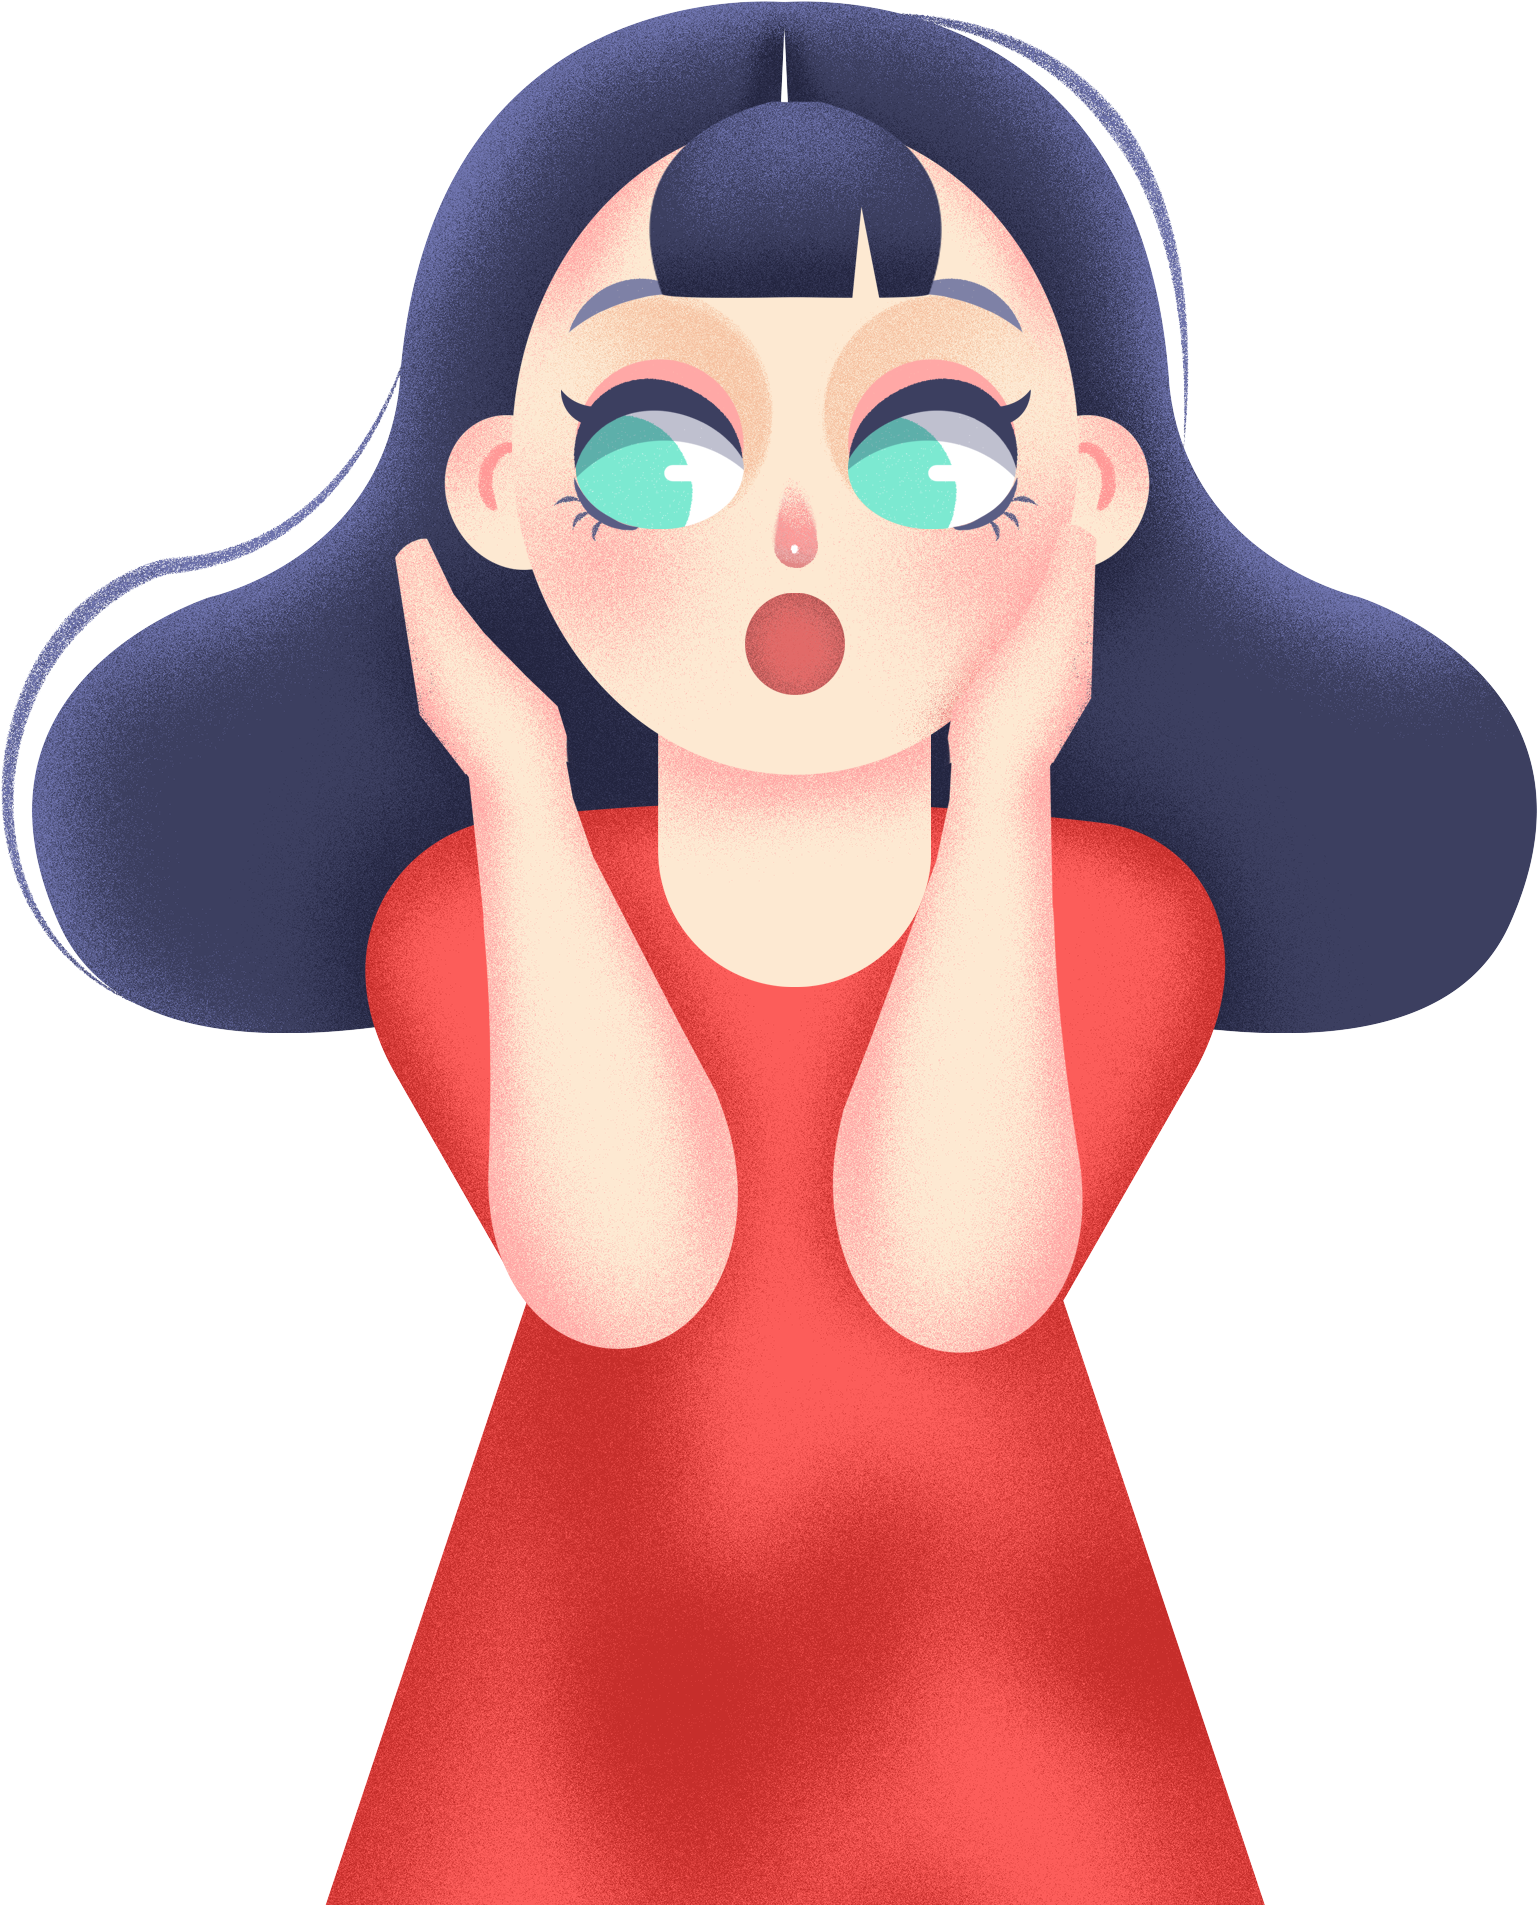 A Cartoon Of A Girl With Her Hands On Her Face